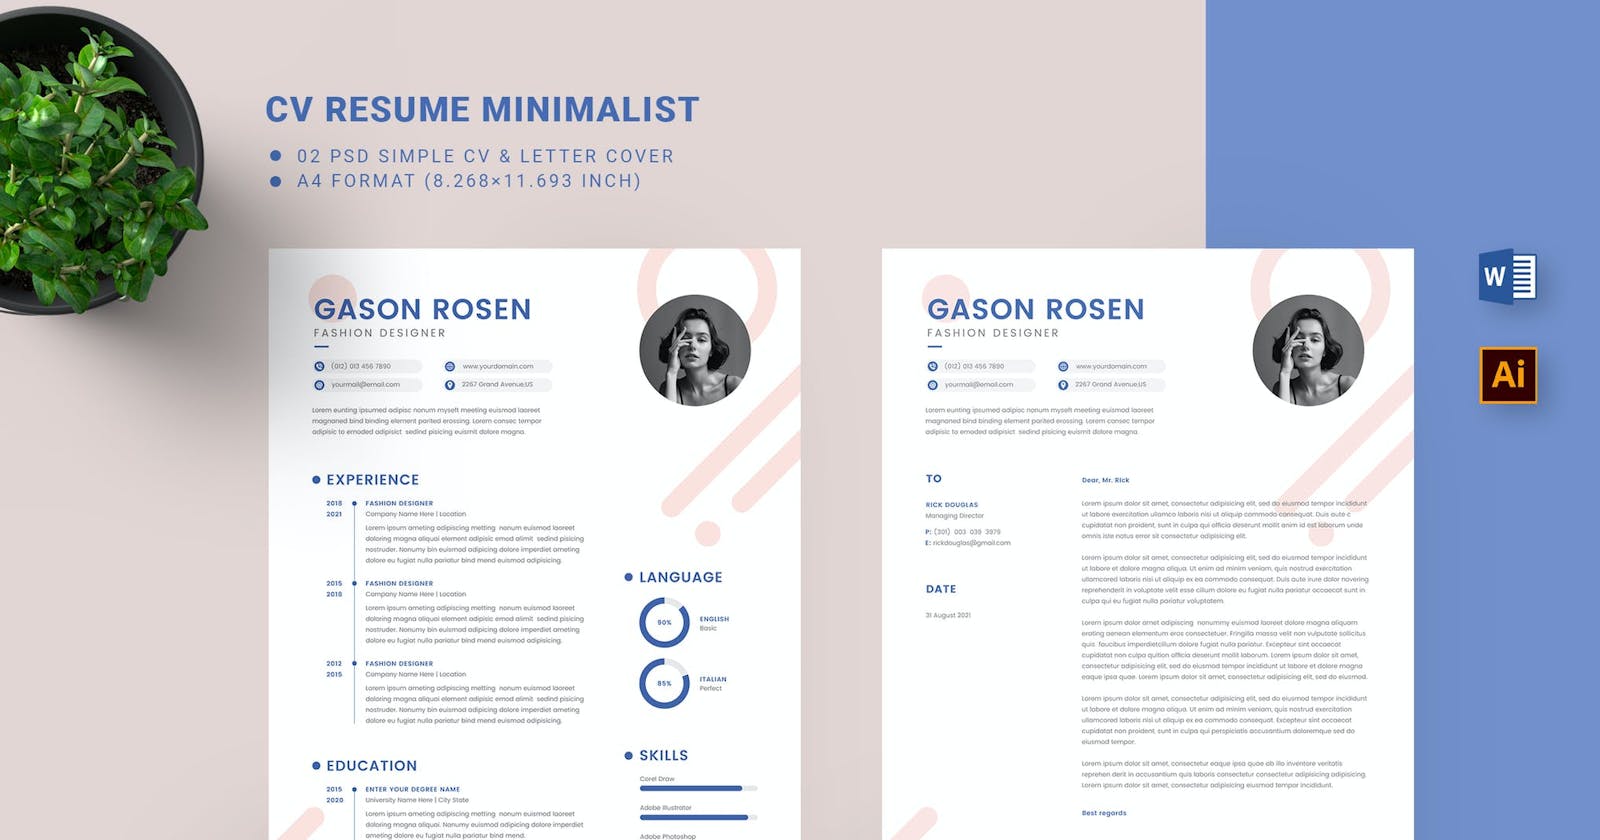 Top 10 Websites to Improve Your Resume Design and Preparation